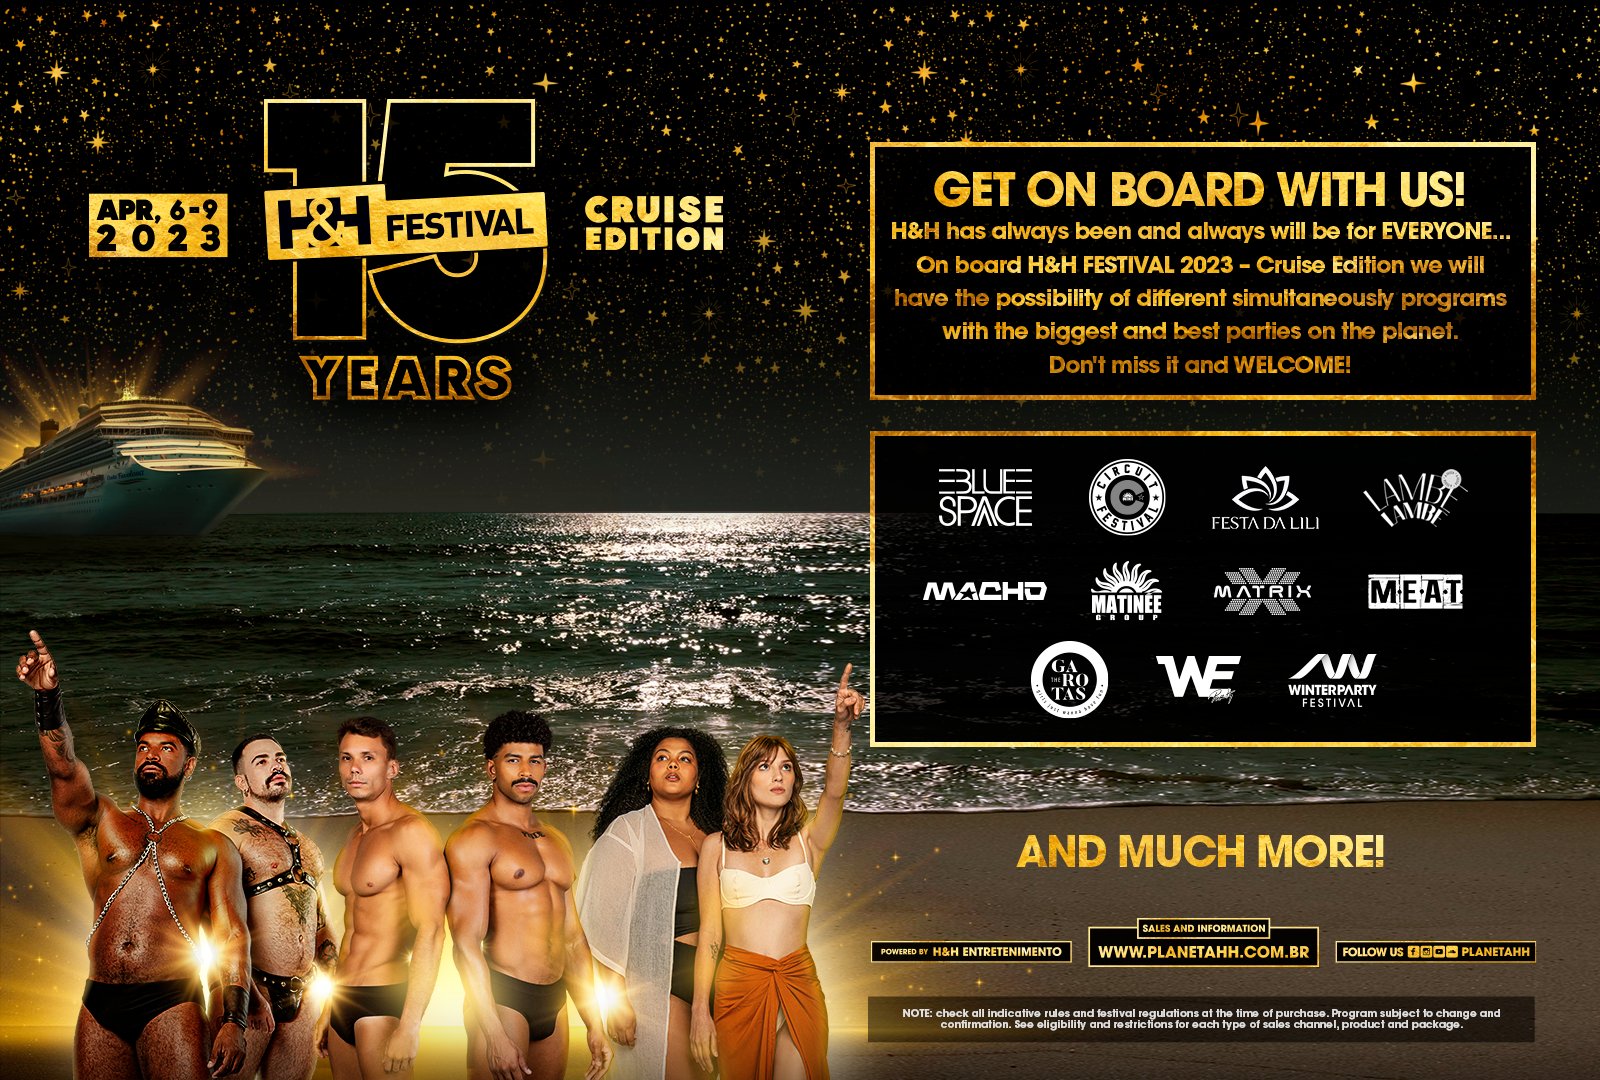 H&H FESTIVAL on Twitter "GET ON BOARD WITH US on H&H FESTIVAL 2023